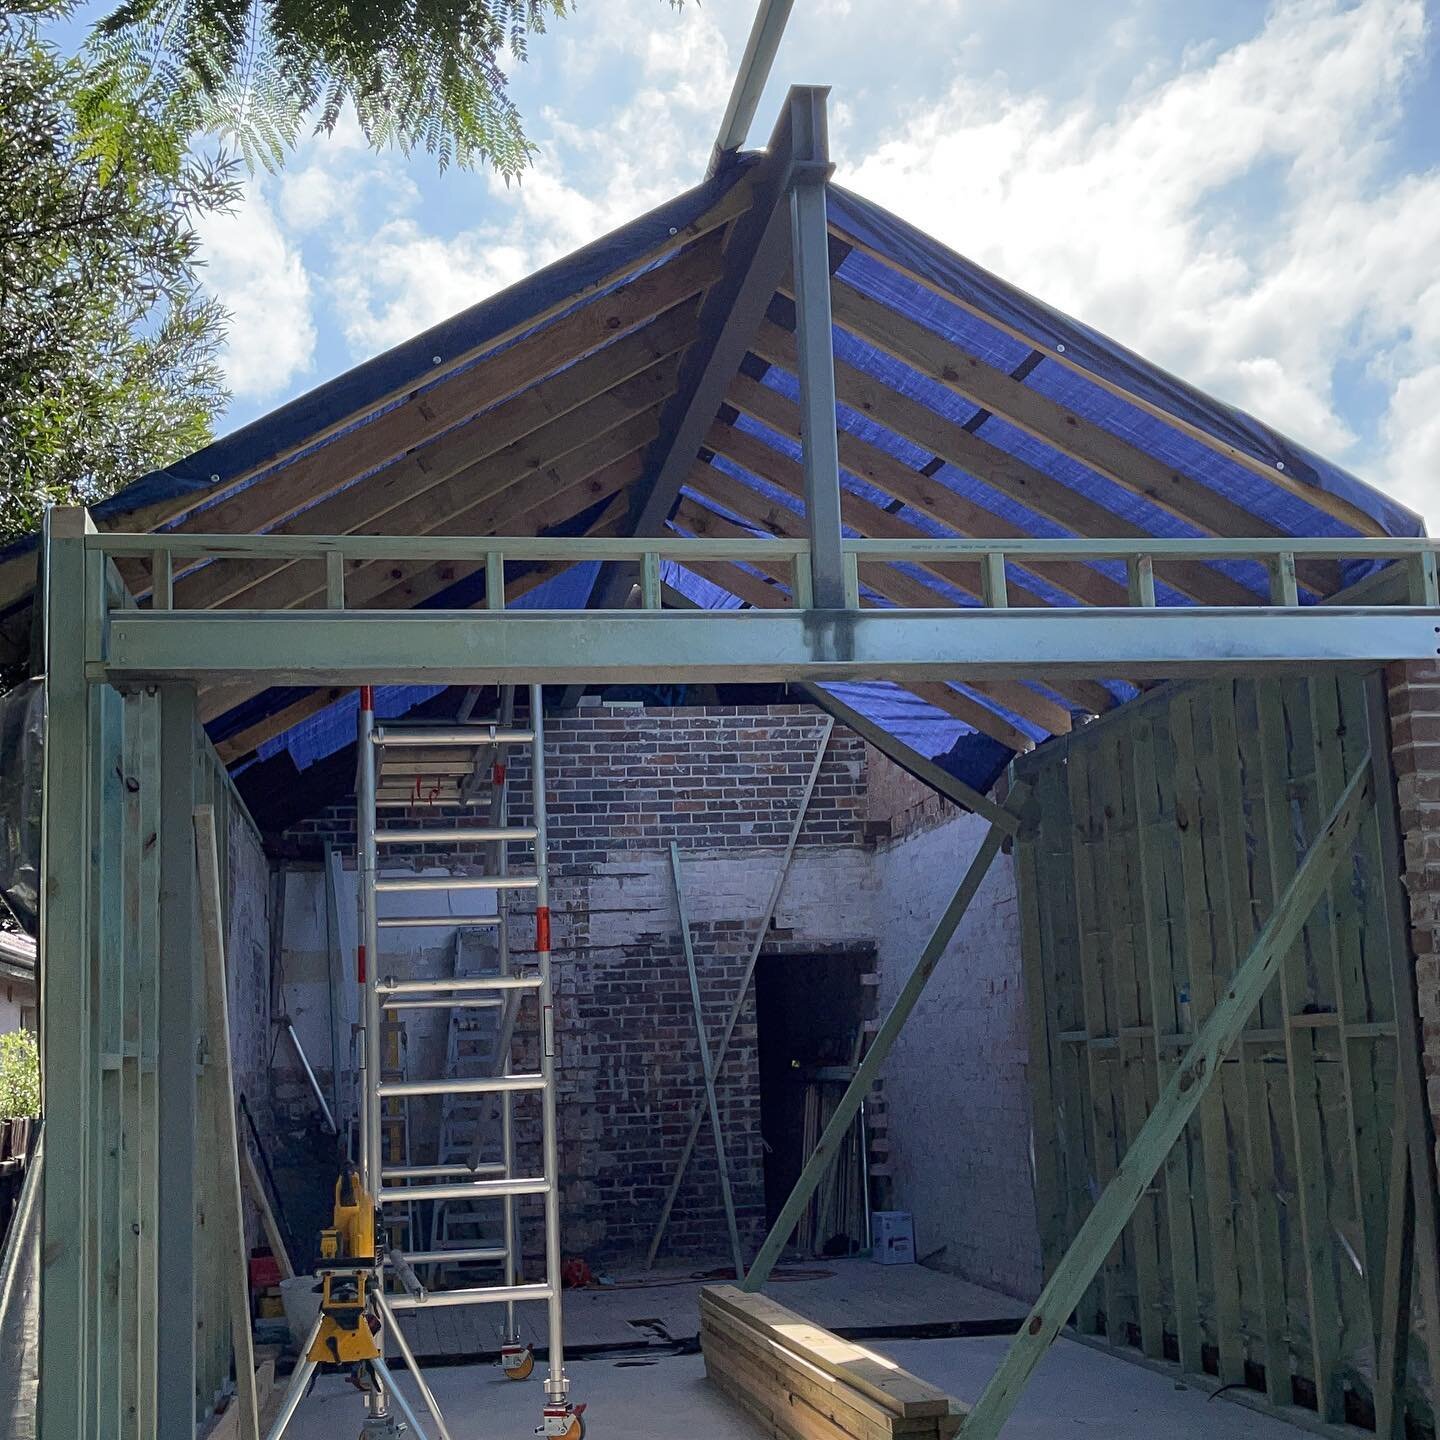 Steel  Walls and Roof we done in maroubra